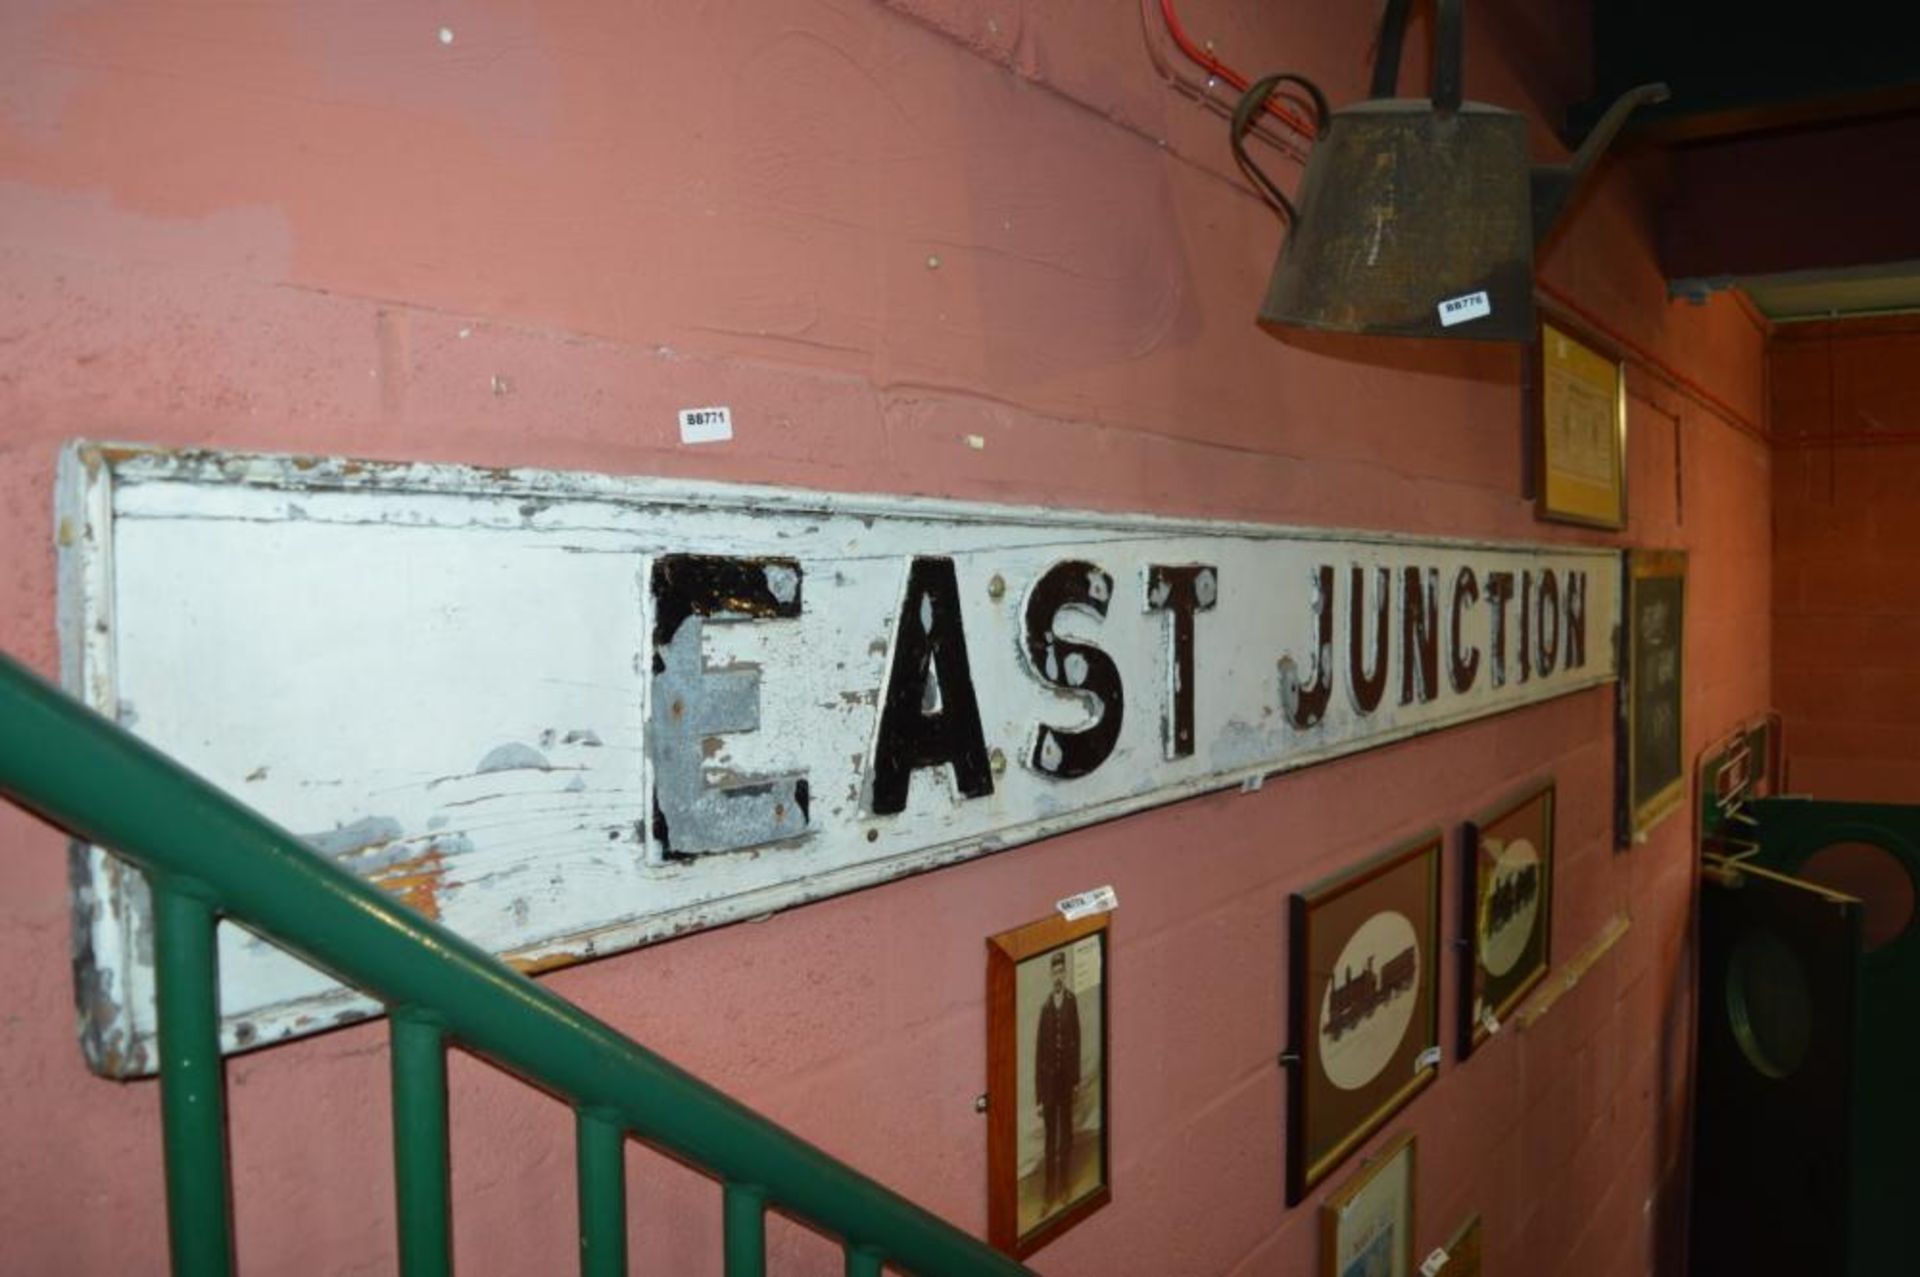 1 x East Junction Vintage Railway Signage - Wooden Back With Metal Lettering Finished in Black and W - Image 5 of 8